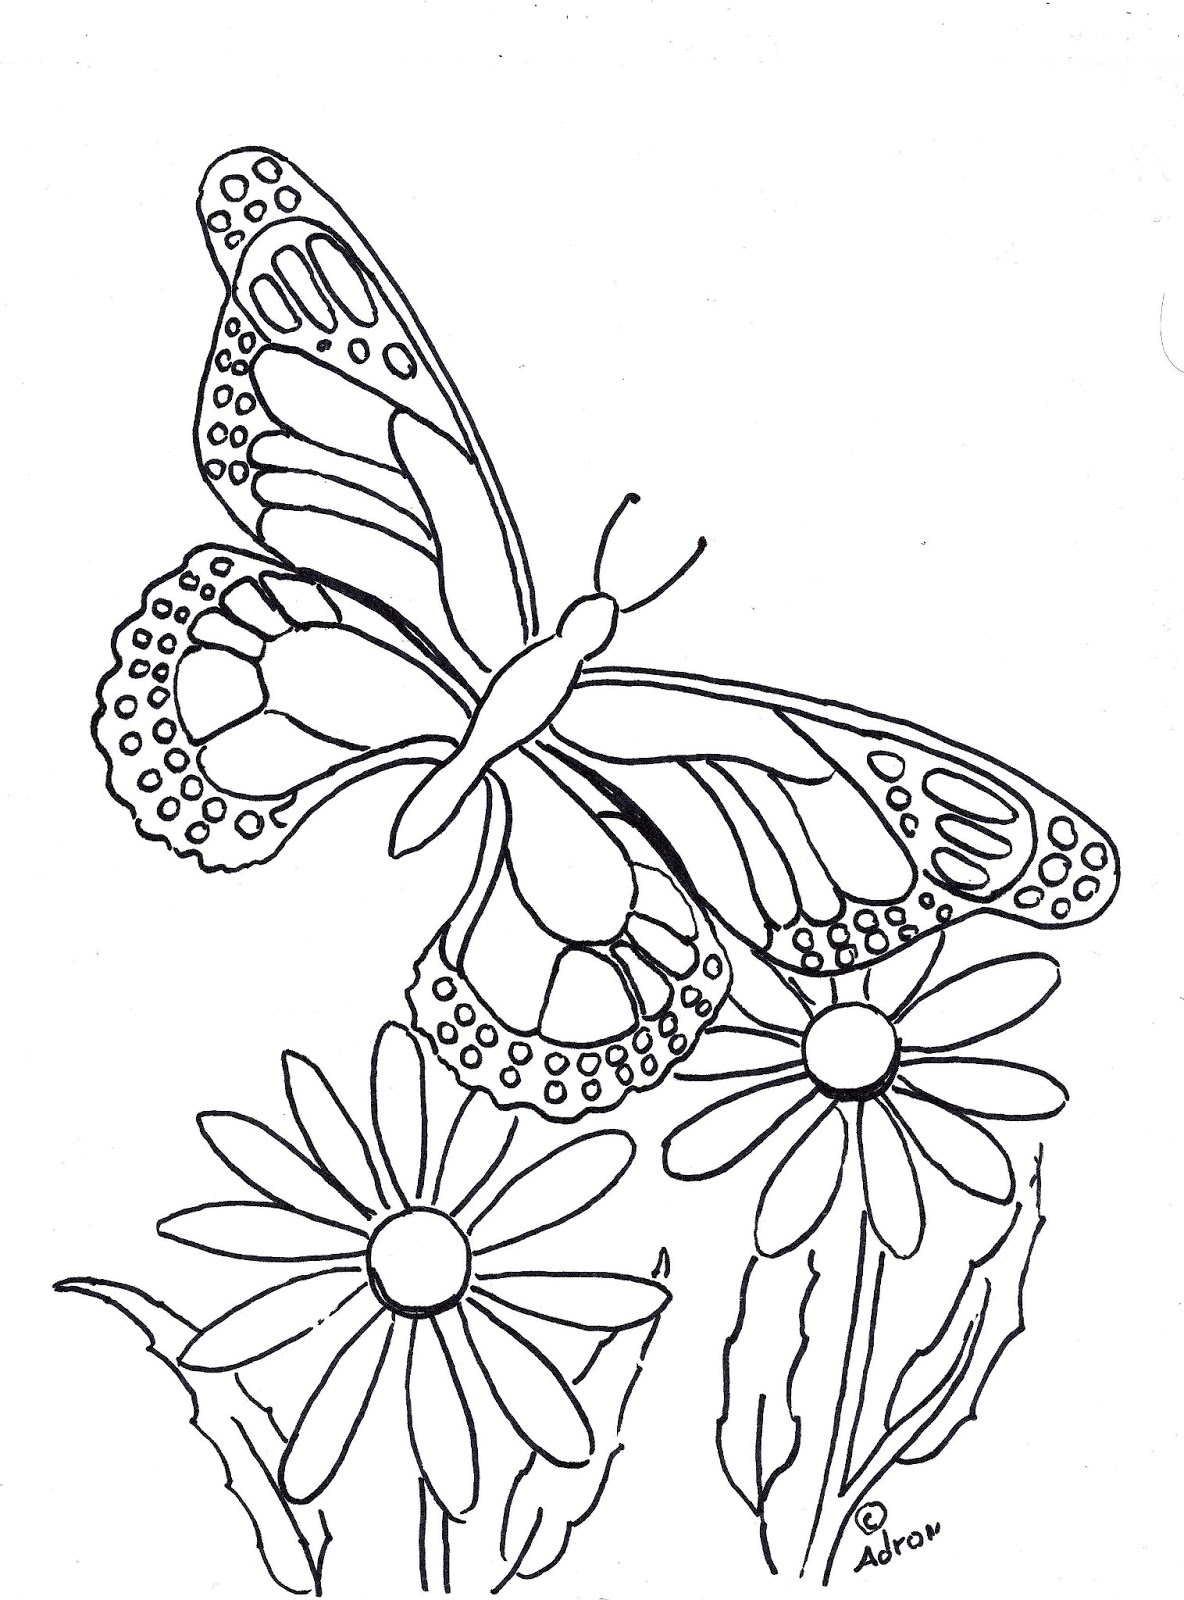 Coloring Pages For Kids By Mr Adron Butterfly Coloring Page To Print And Color